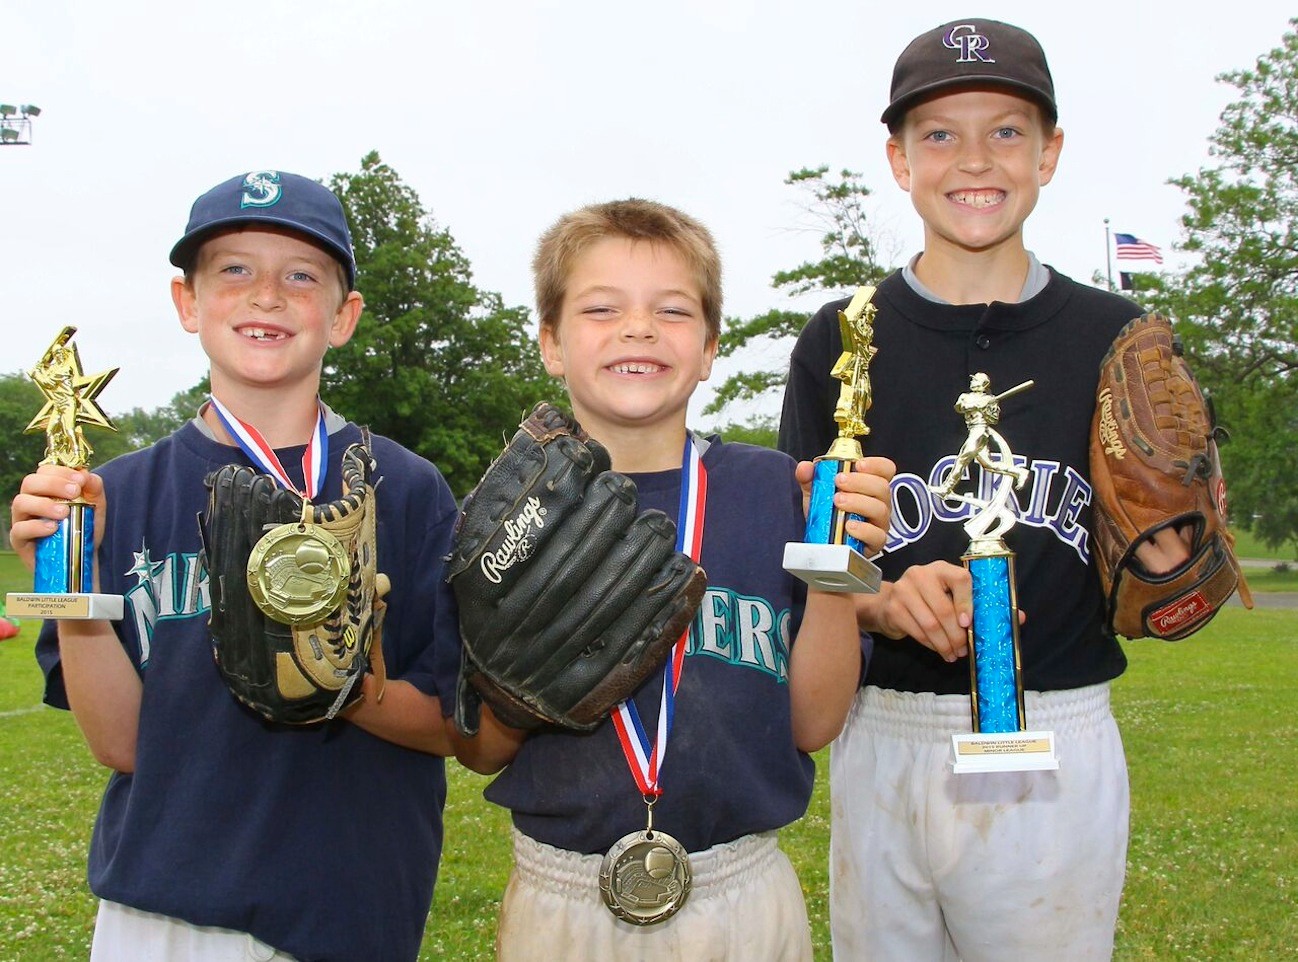 It was a successful season for the Kirchner brothers, from left, Logan, 9, Preston, 7, and Zachary, 10. They each received trophies during the Baldwin Little League closing ceremony in June 20.